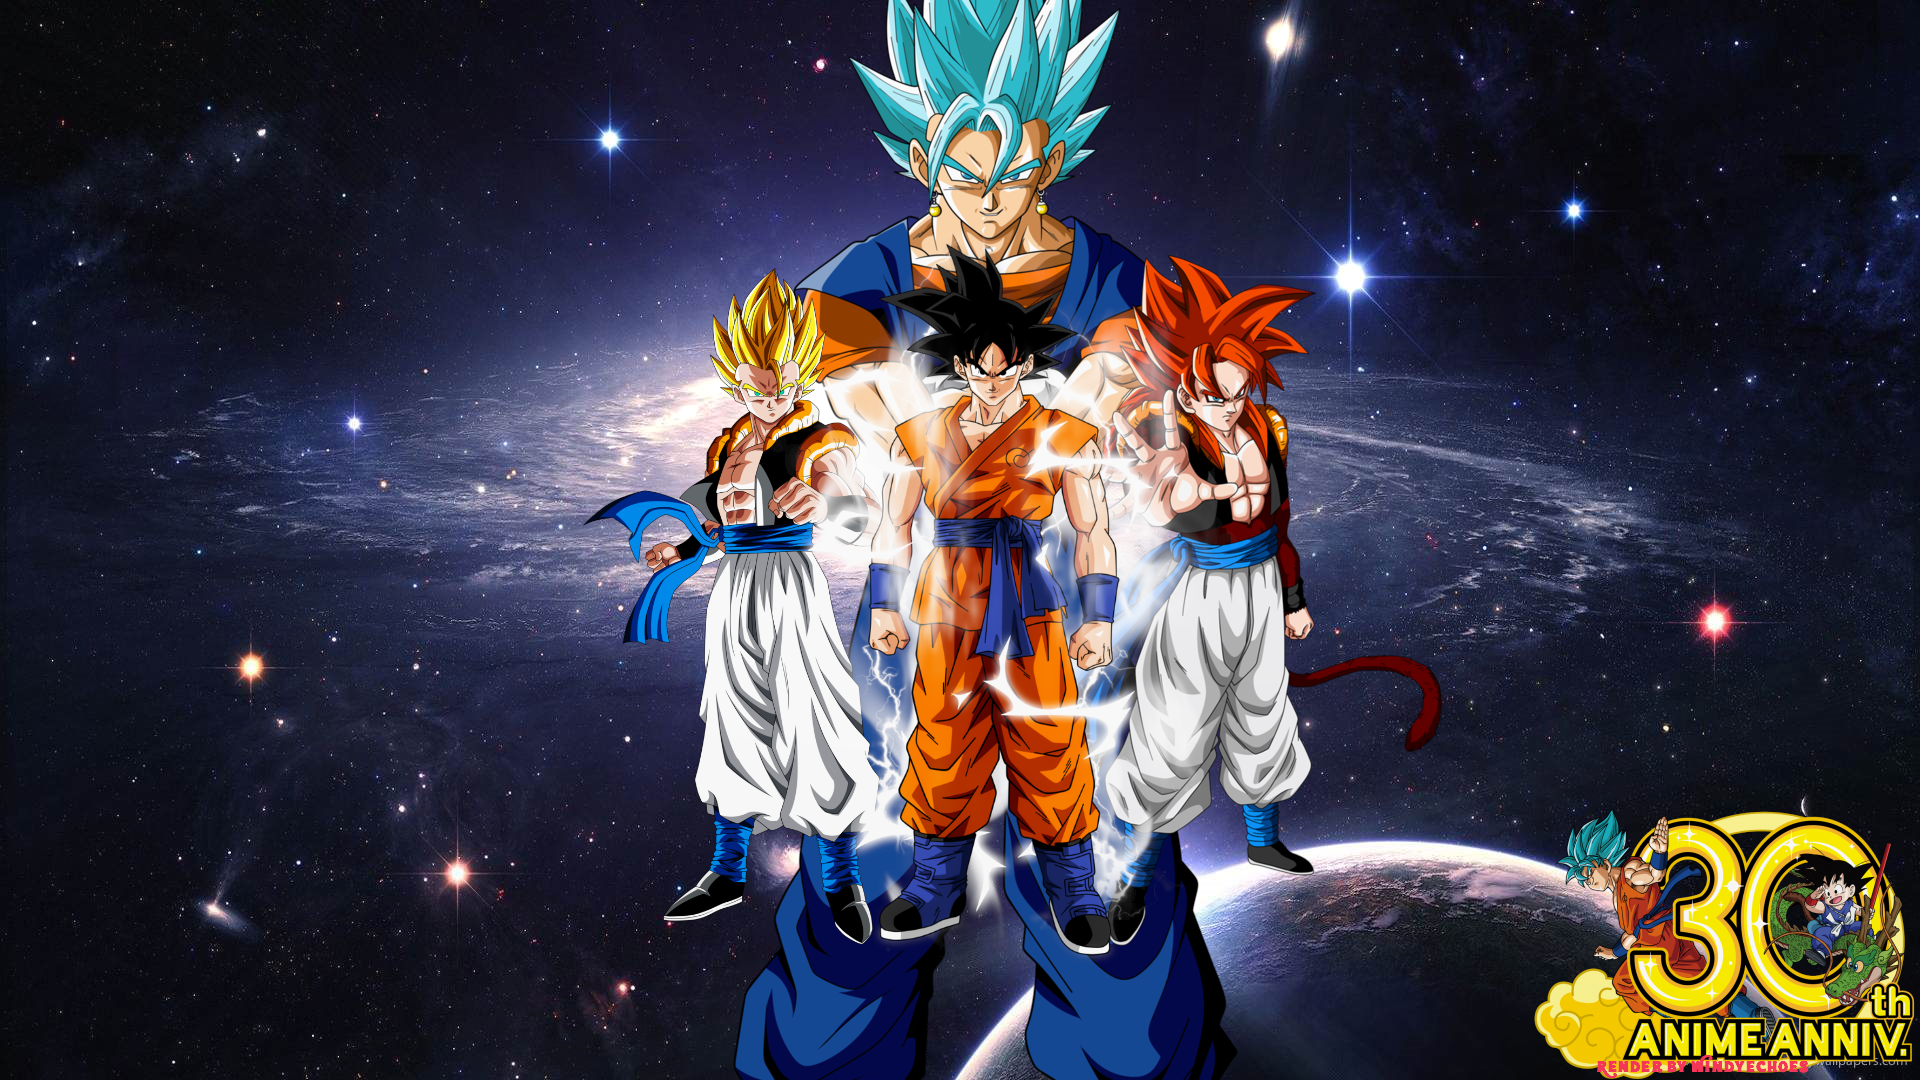 dbz wallpapers hd,anime,dragon ball,fictional character,massively multiplayer online role playing game